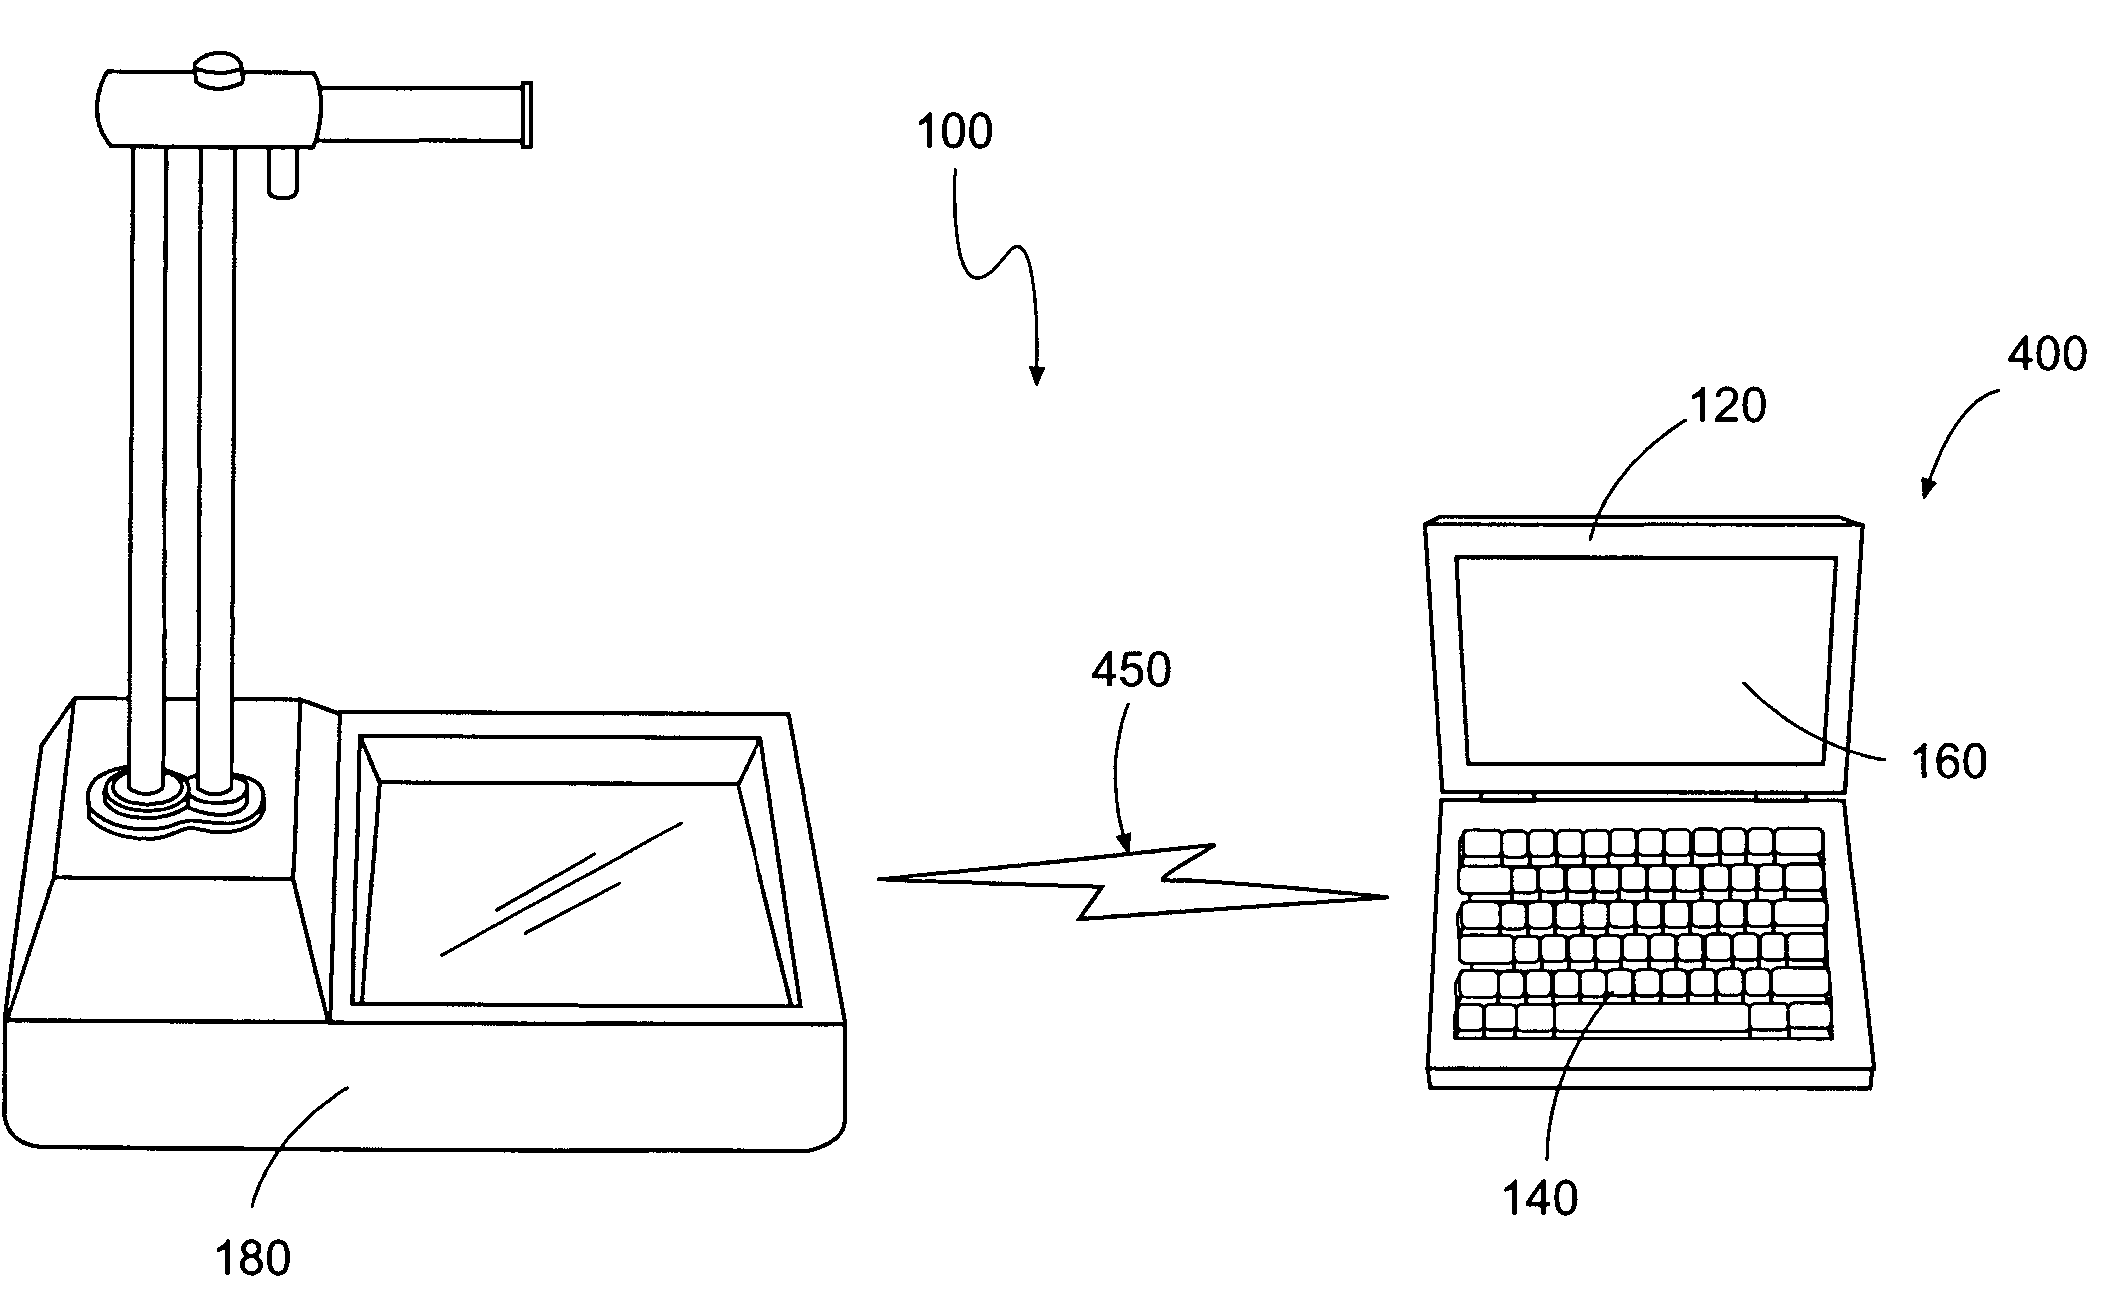 Paving-related measuring device incorporating a computer device and communication element therebetween and associated method